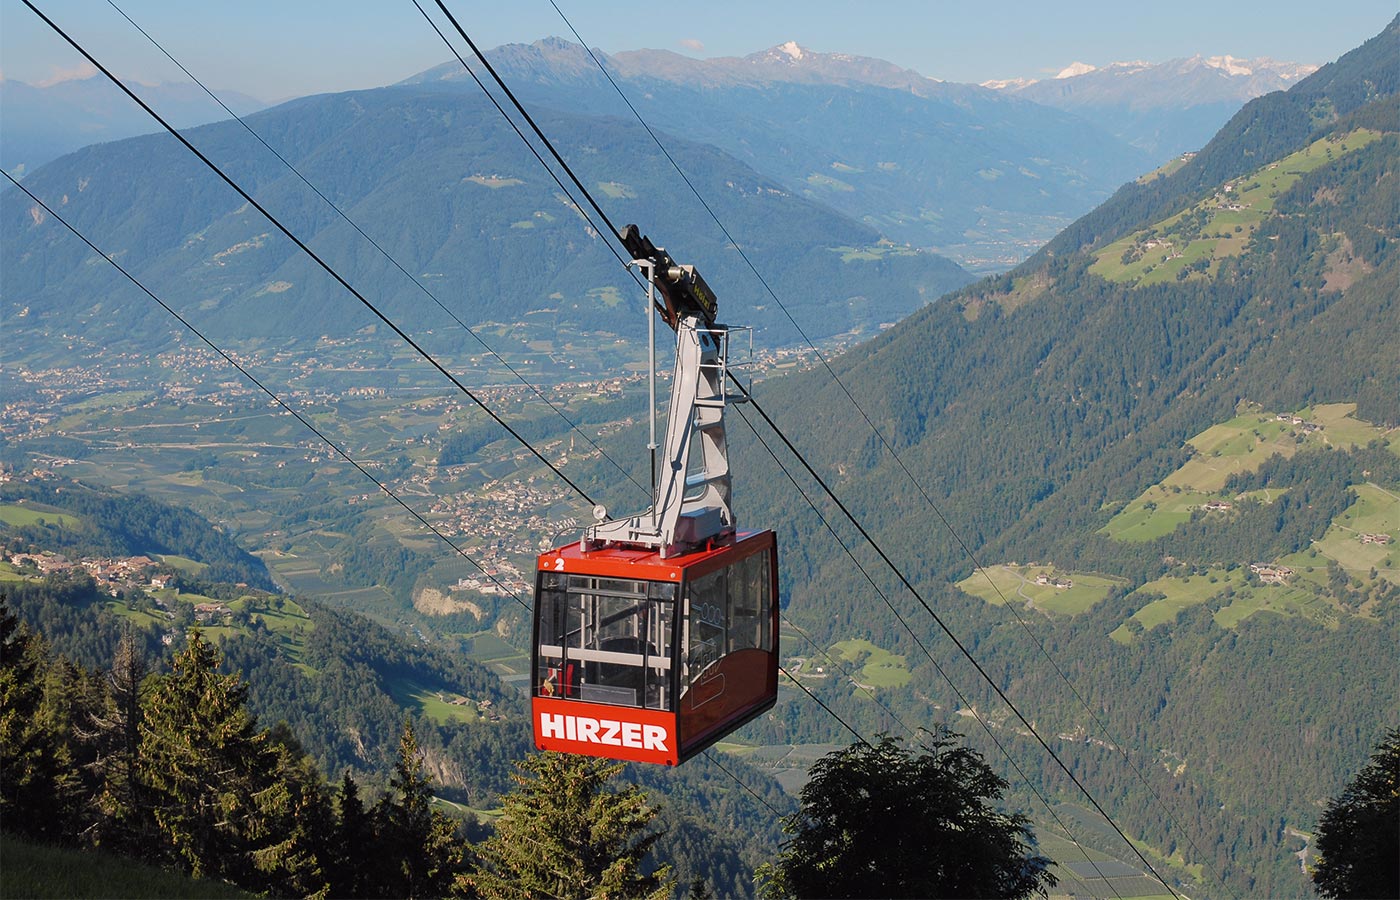 Hirzer cable car at 1980mt altitude